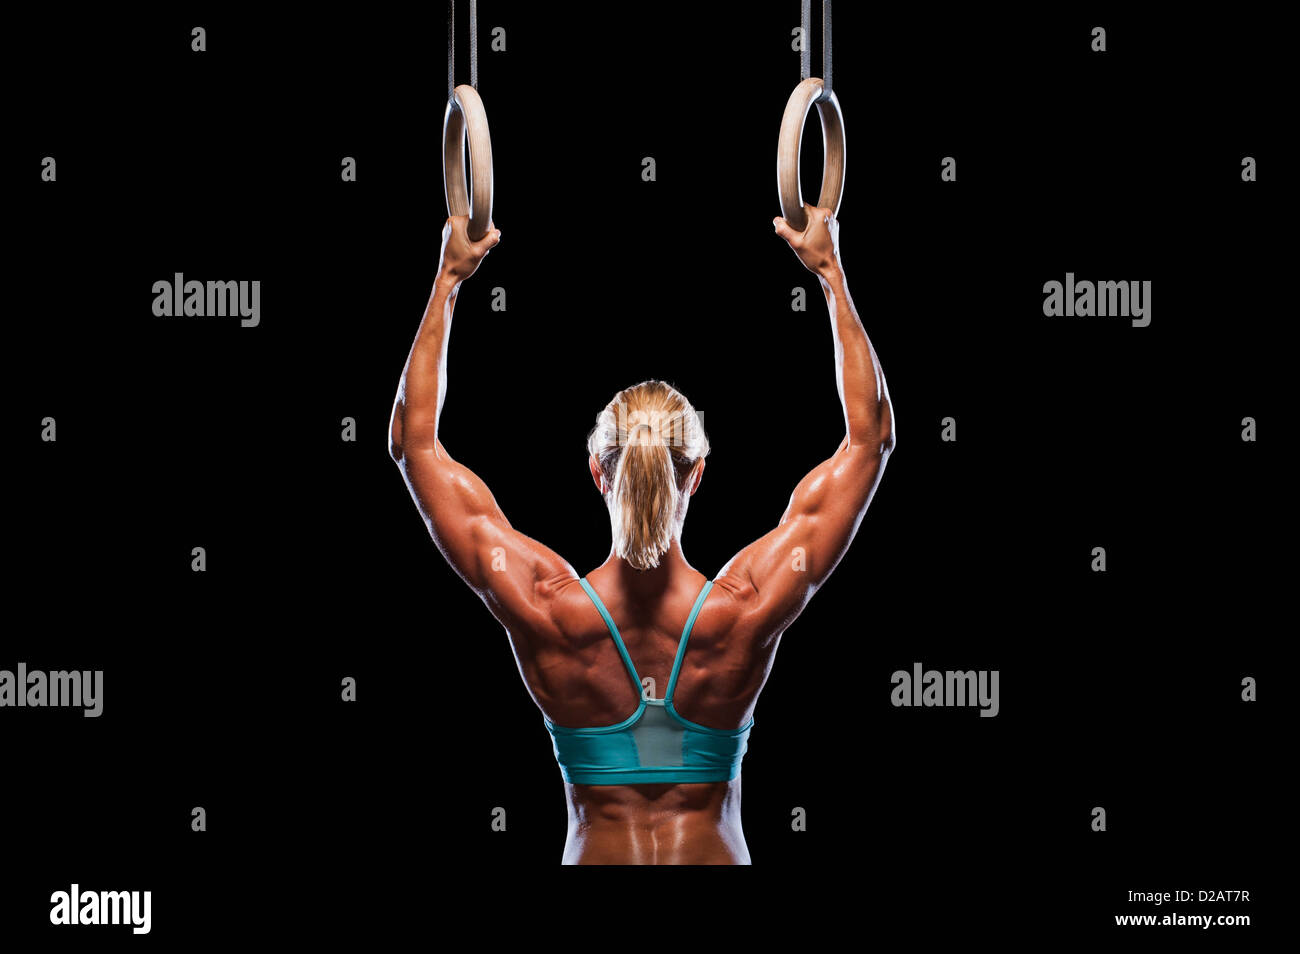 Woman using exercise rings Stock Photo